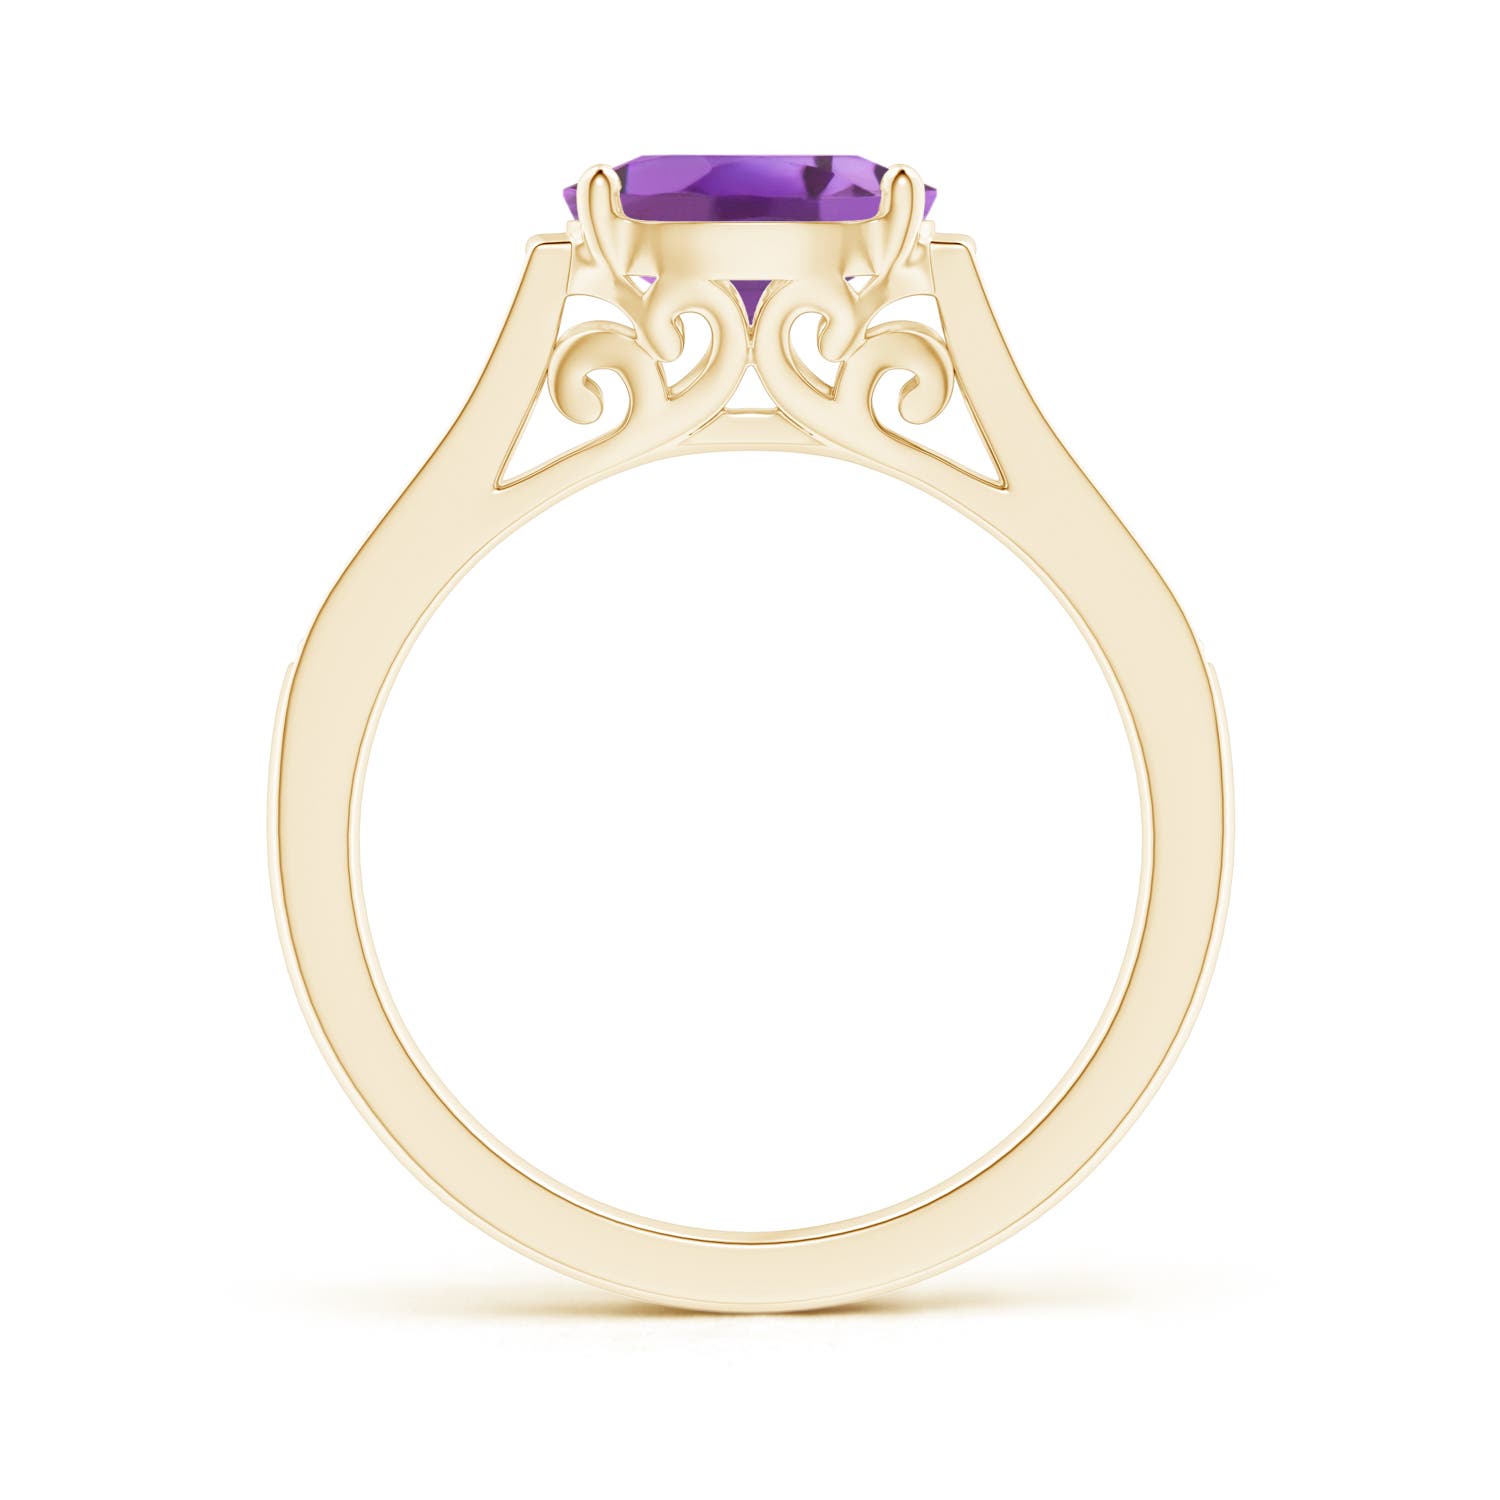 A - Amethyst / 1.29 CT / 14 KT Yellow Gold